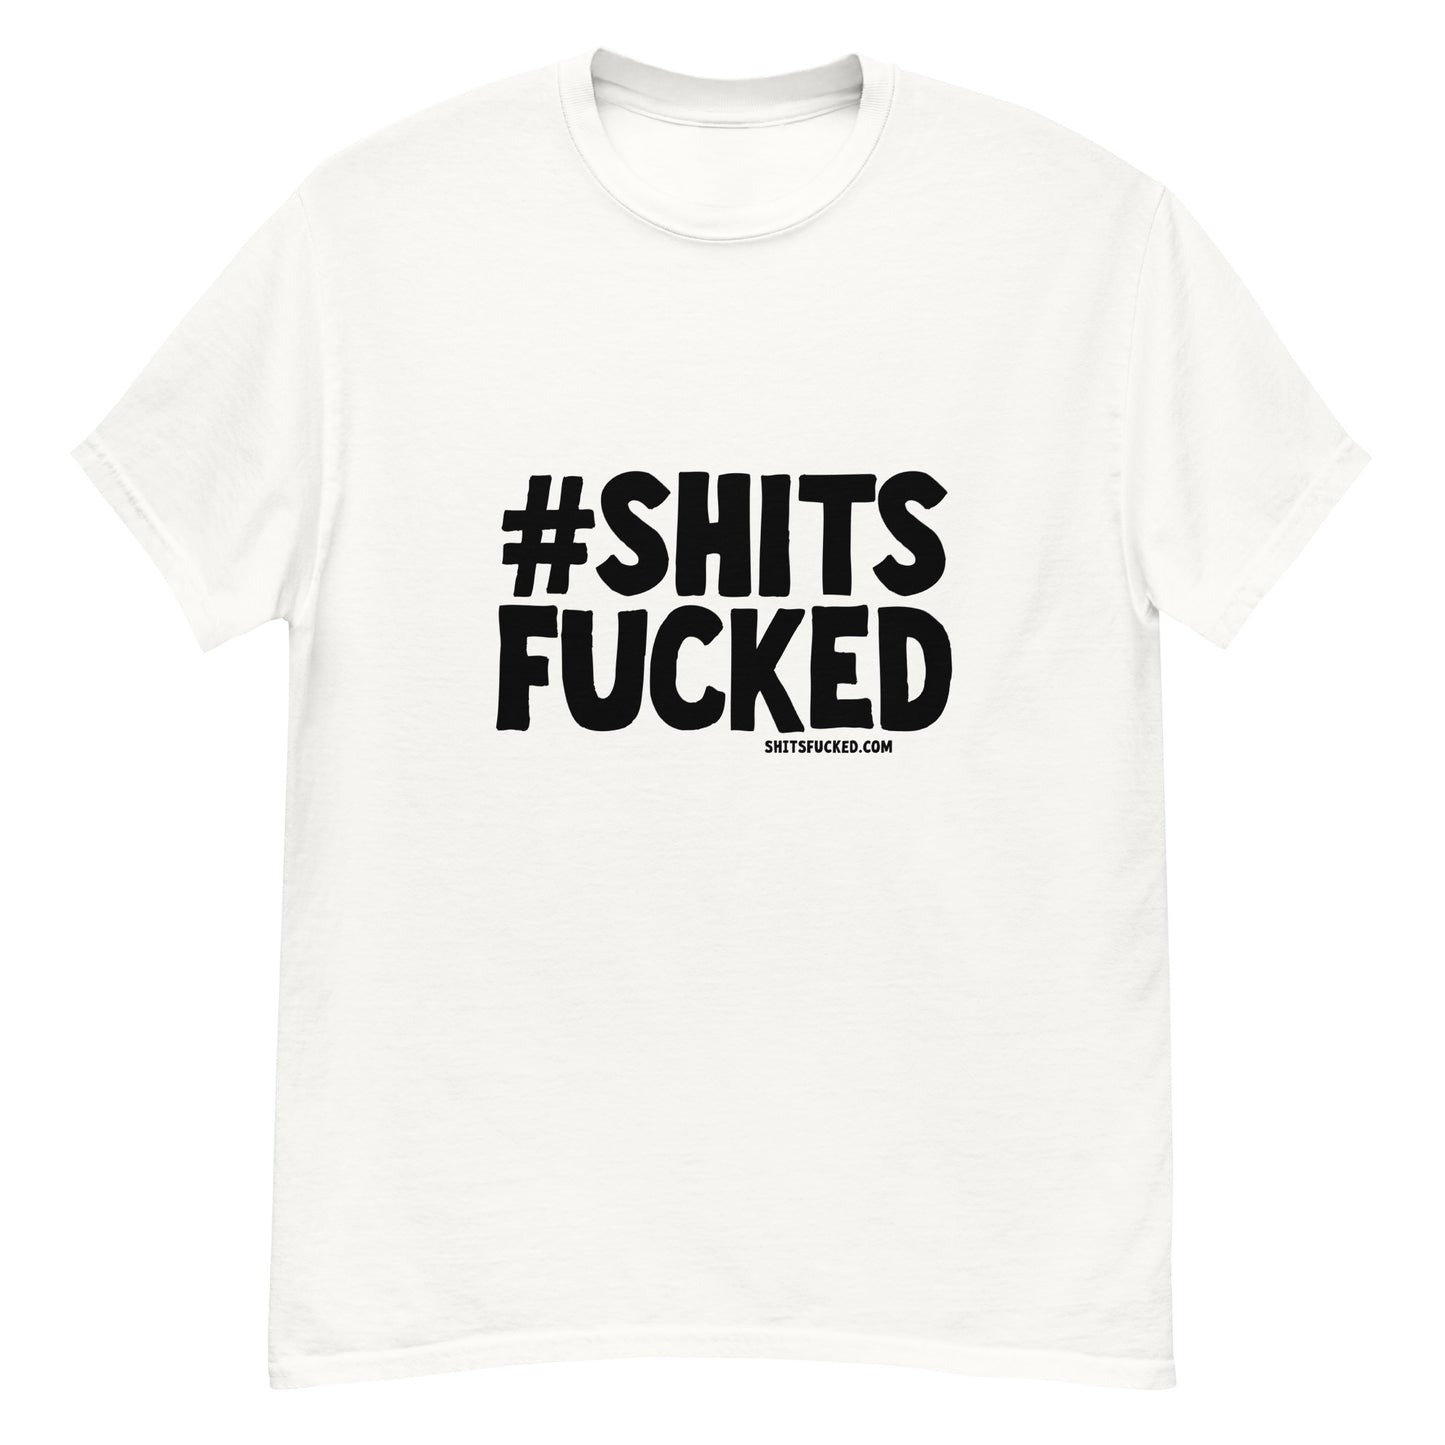 An image of a tee shirt with #shitsfucked on it, #shitsfucked a hilarious clothing and apparel store, political clothing, biden jokes, trump jokes